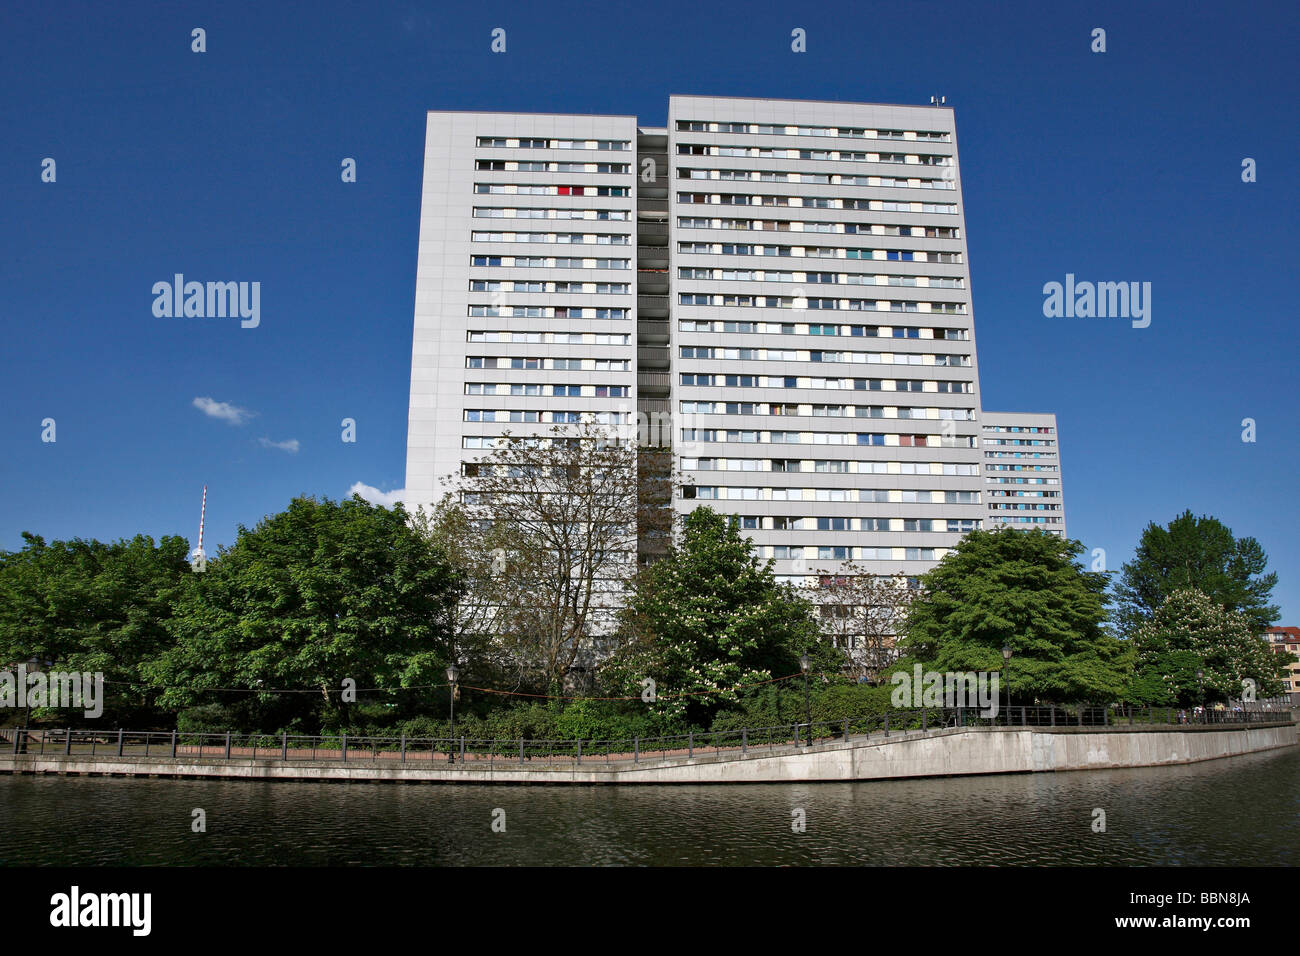 Plattenbau, prefabricated concrete high-rise building on Fishers' Island on the Spree River in Berlin, Germany, Europe Stock Photo